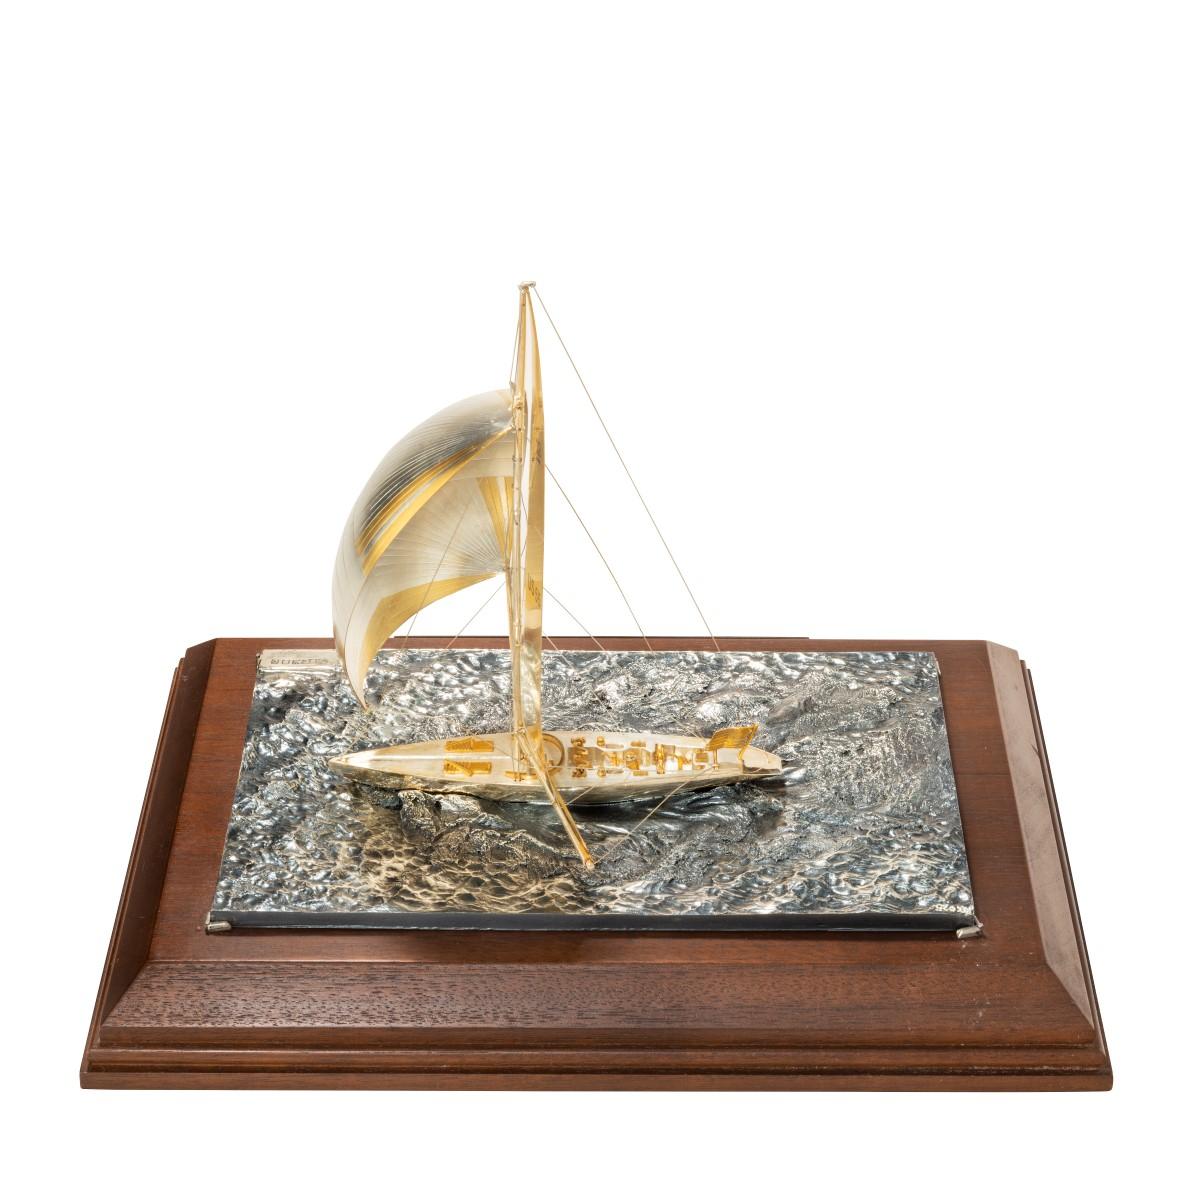 Late 20th Century Cased Silver and Gilt Model of America’s Cup Yacht Stars and Stripes, 1987